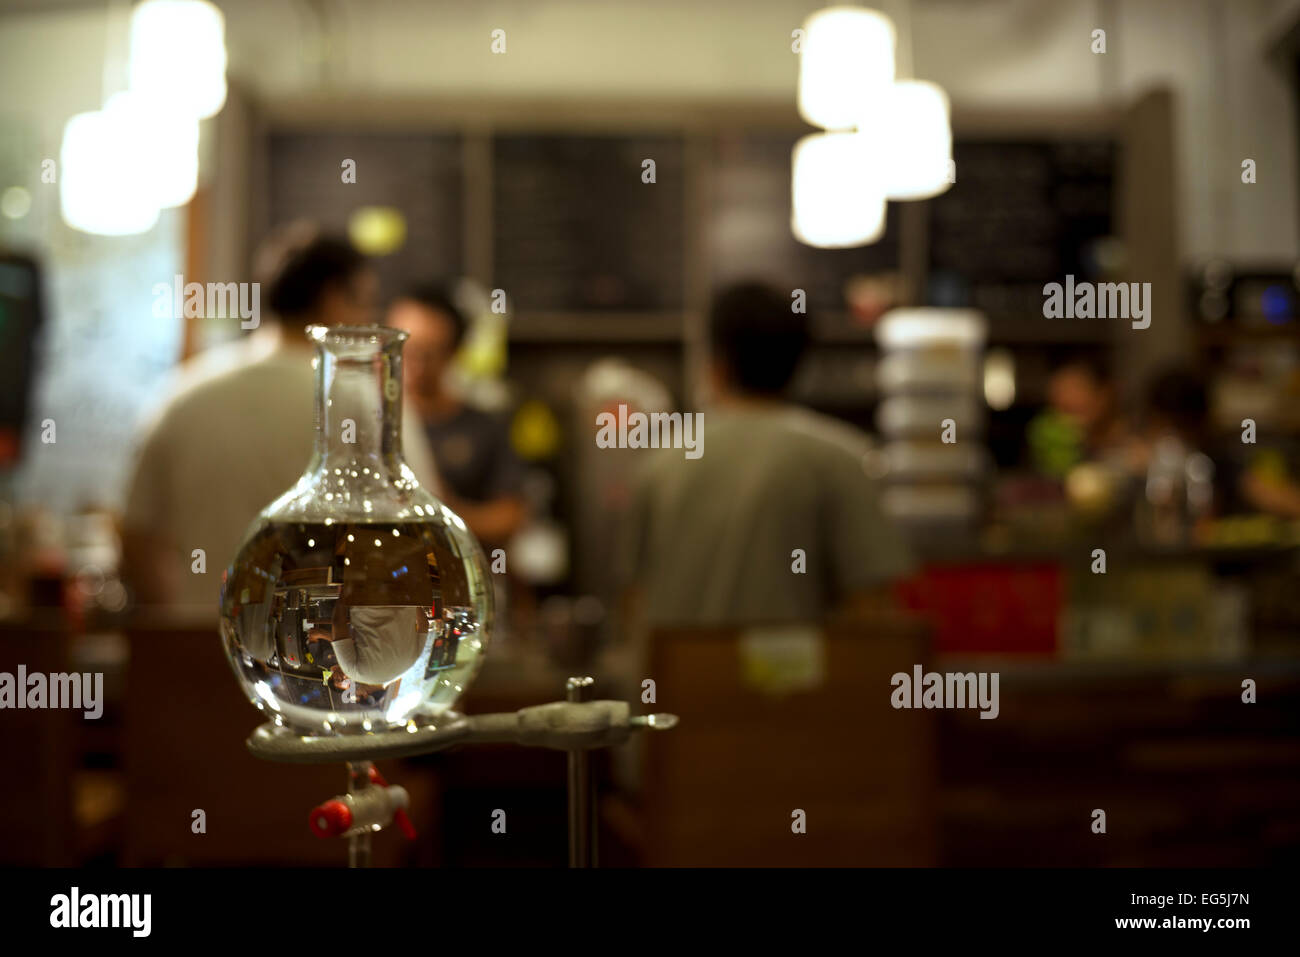 Flask of water with reverse reflection at Gallery Coffee Drip Stock Photo